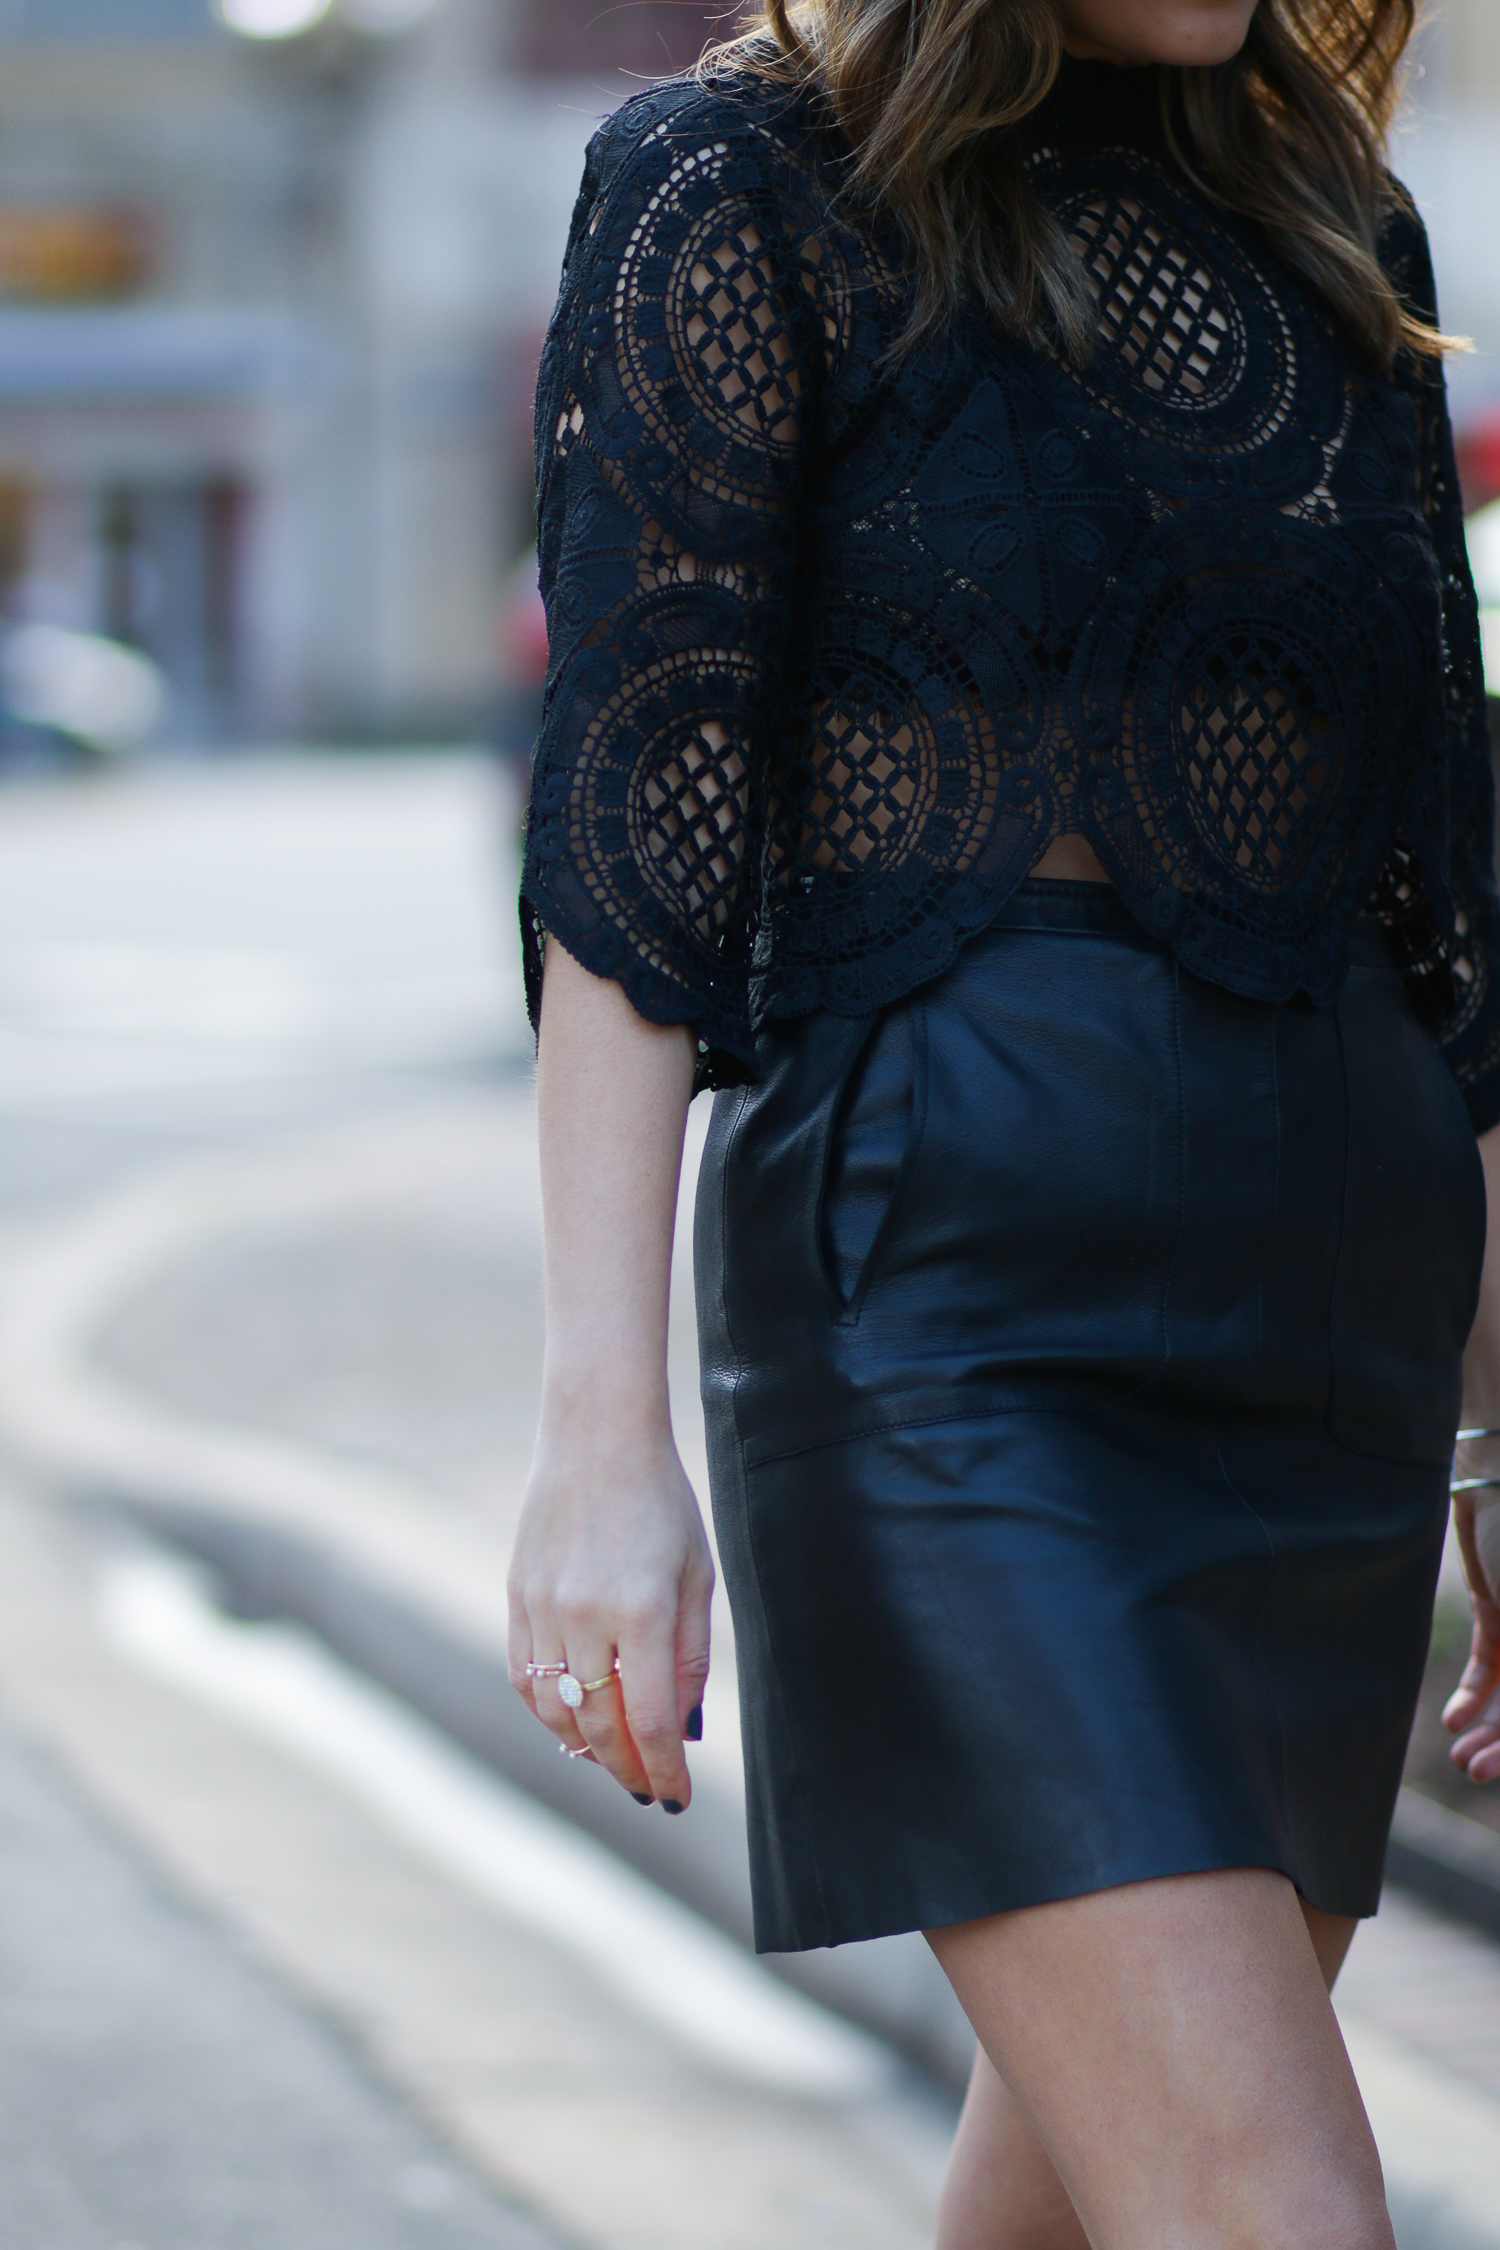 Black Lace Top paired with Leather Skirt 